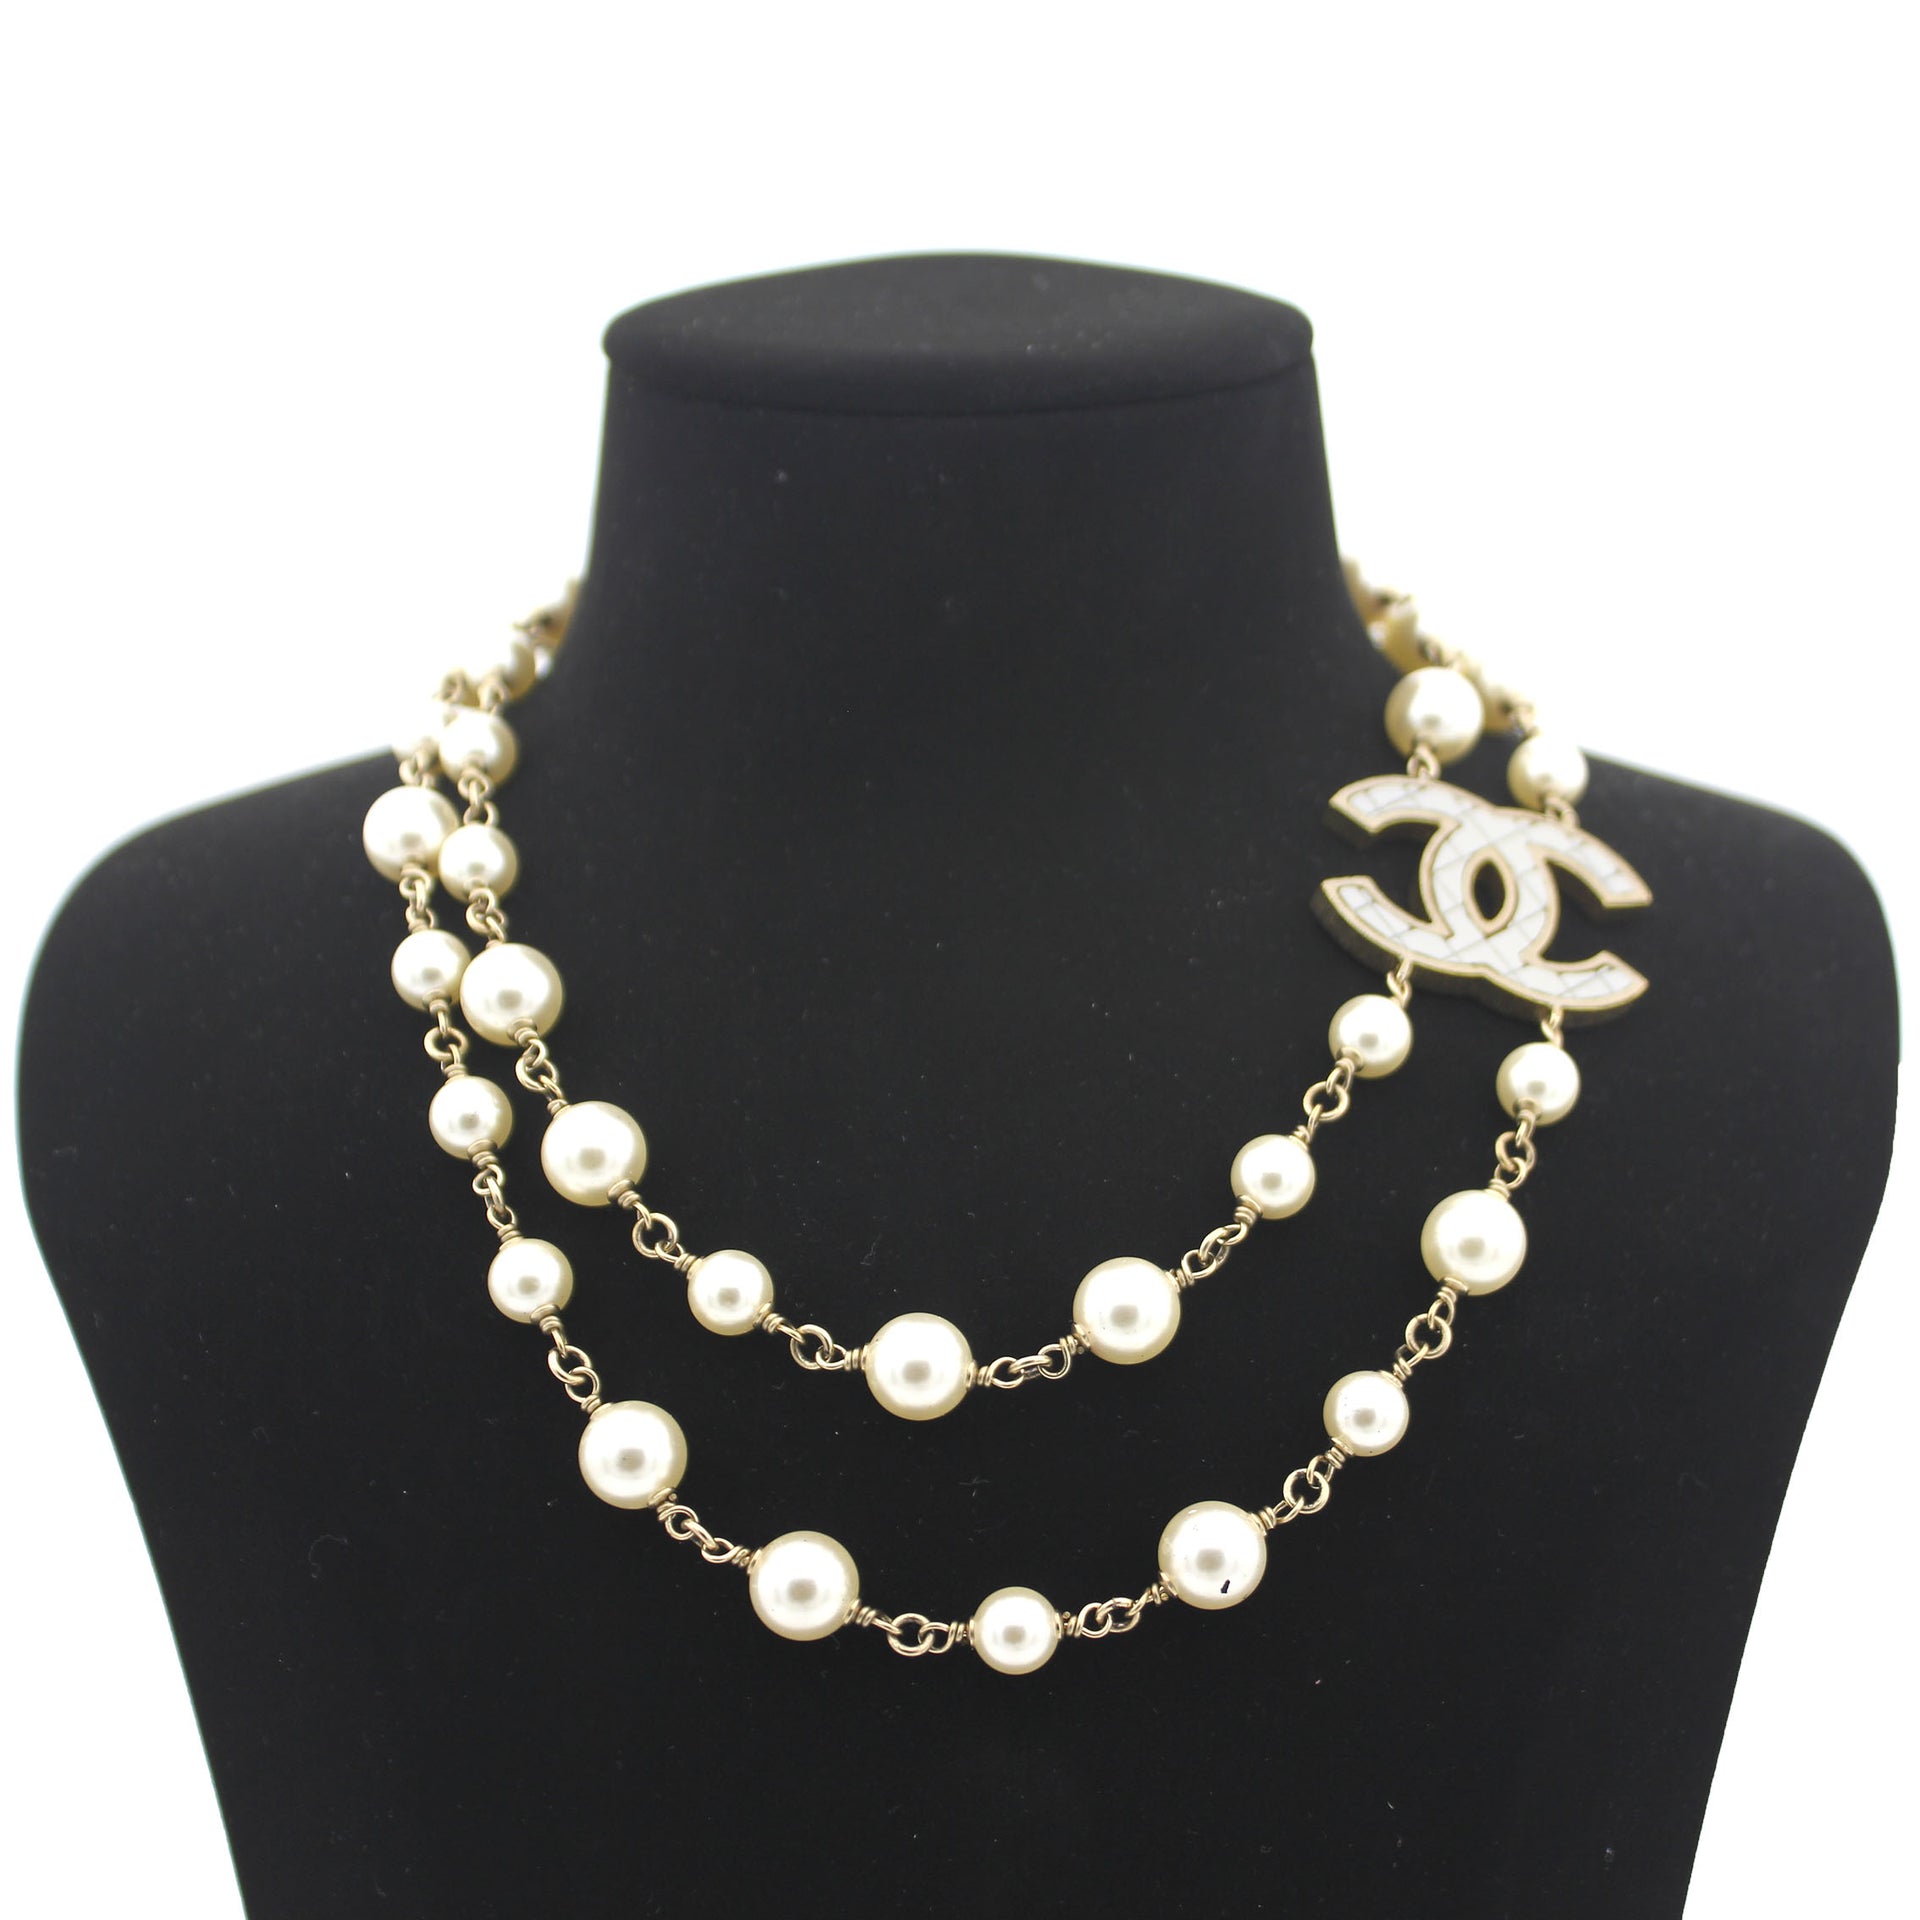 Chanel 21B Coco Neige Pearl Heart Crystal Choker Necklace  Boutique Patina